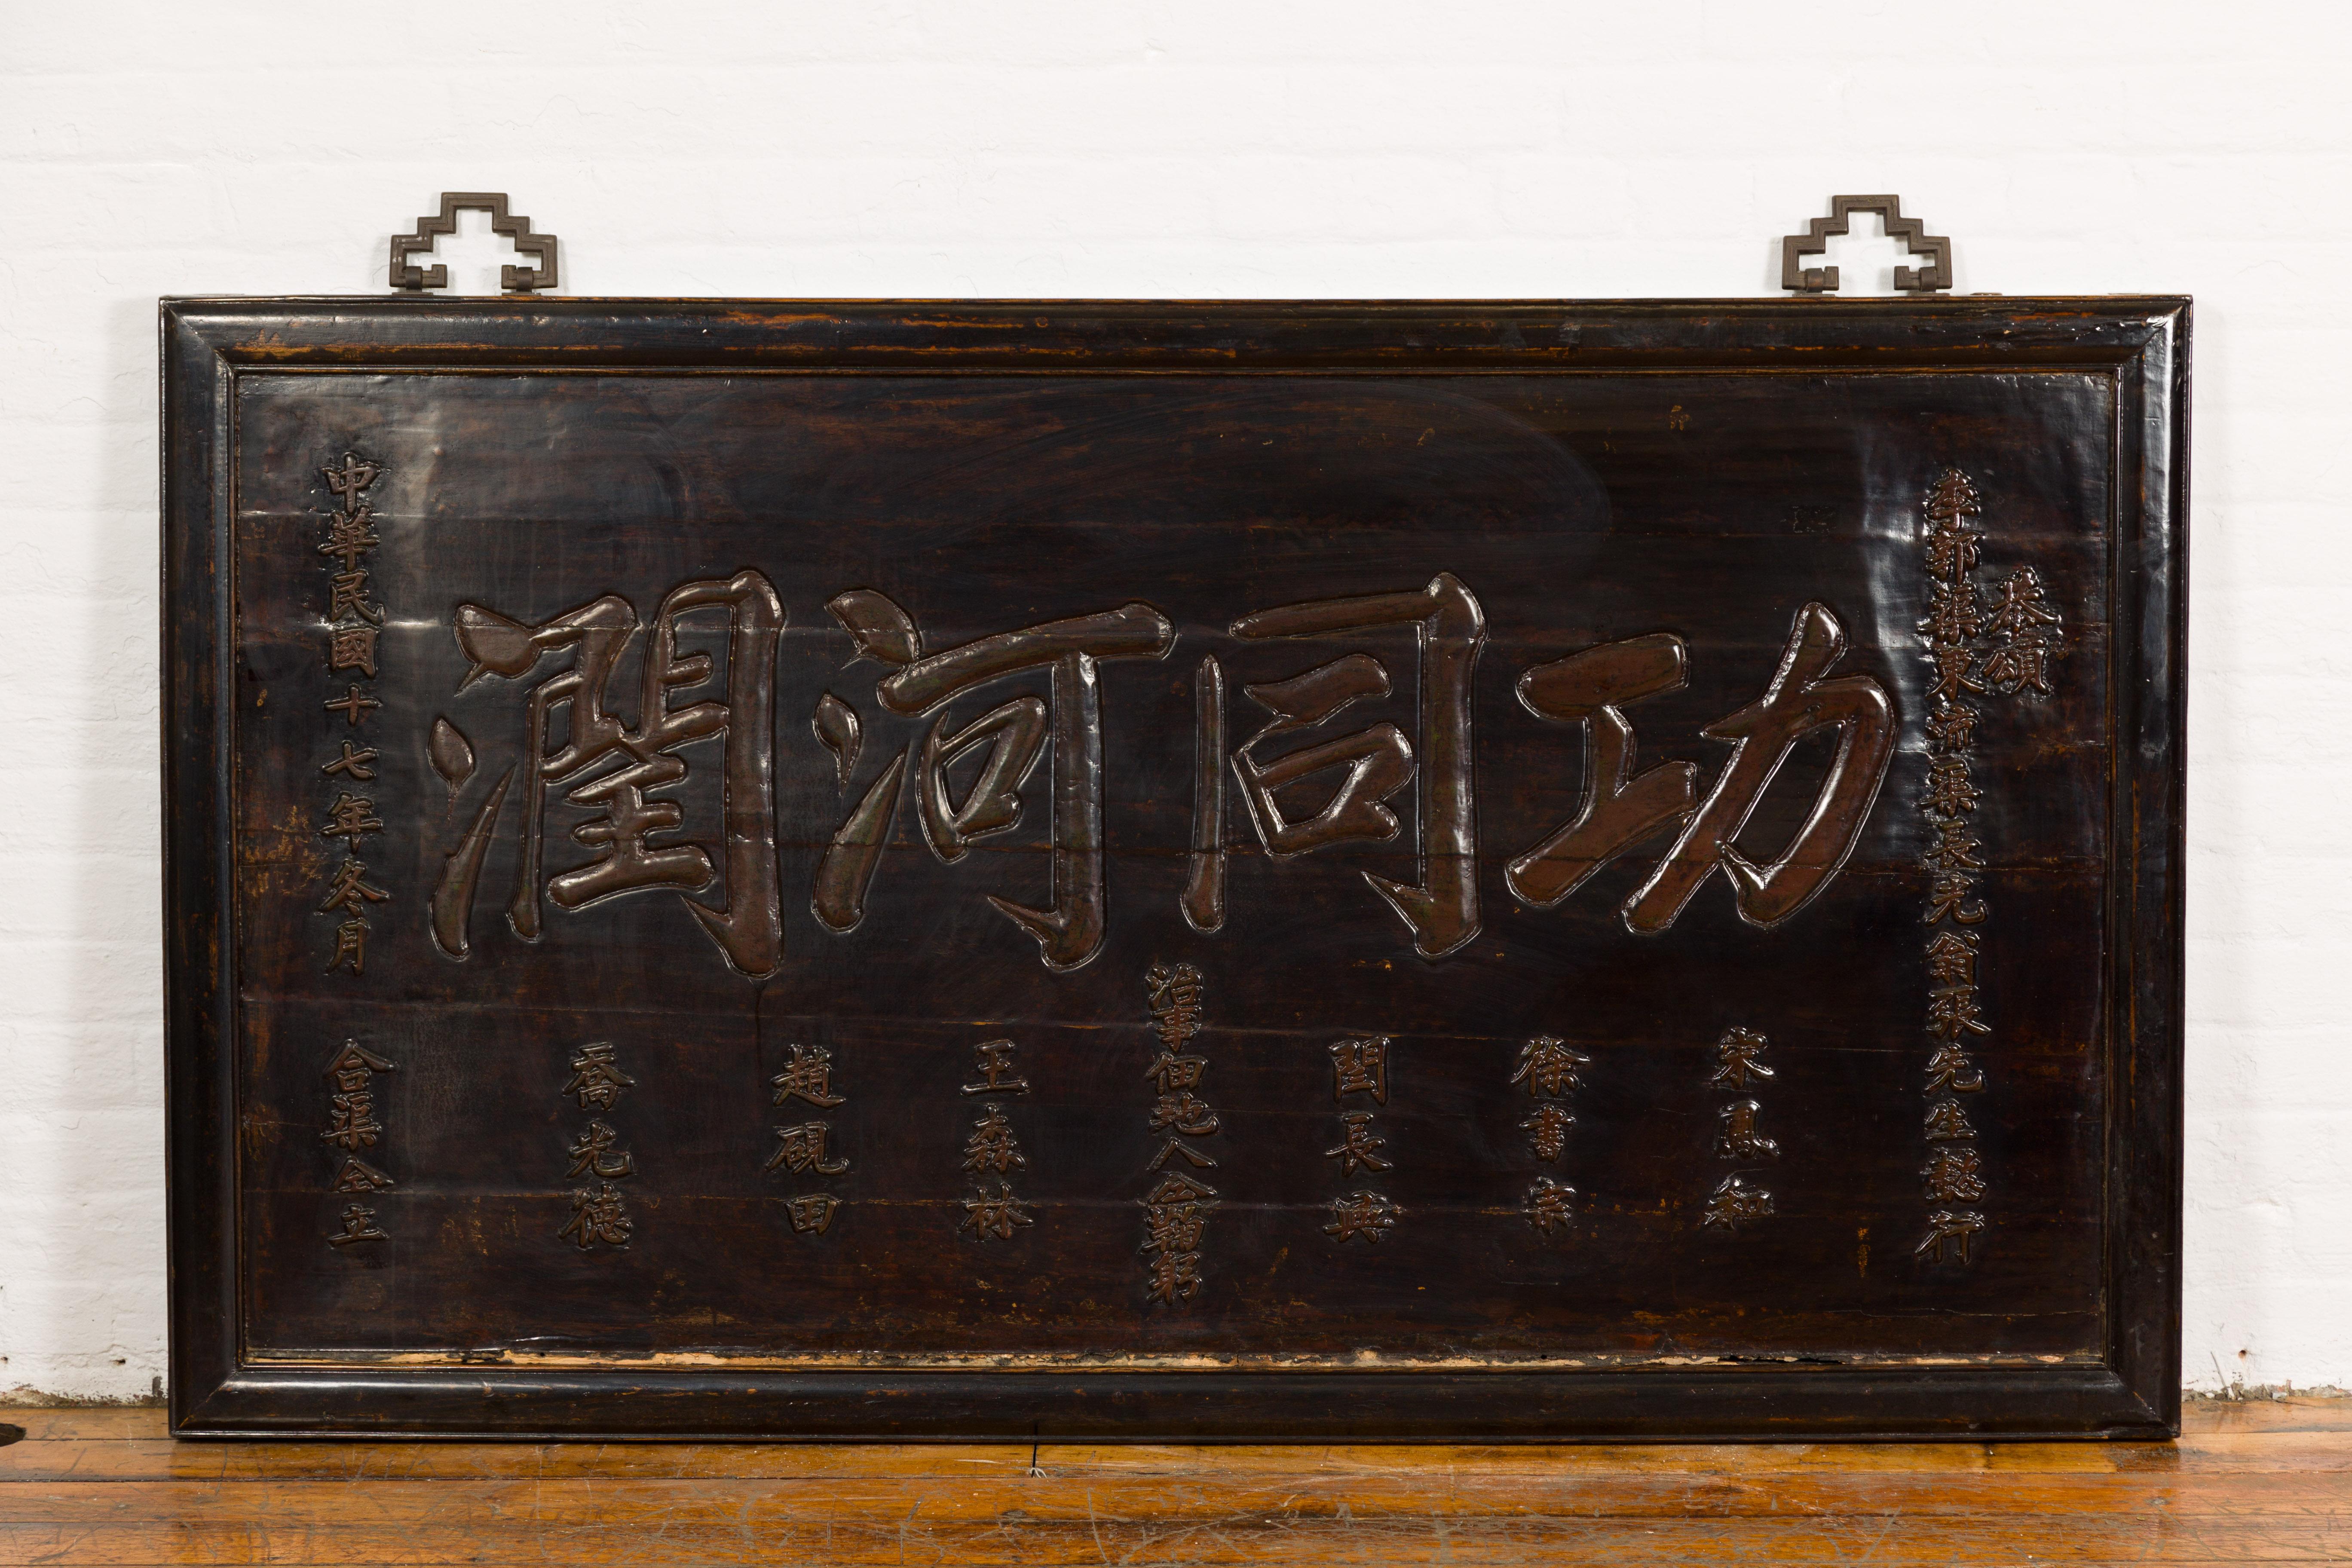 A Chinese Antique Shop Sign with Carved Calligraphy from the 19th century with dark brown/black lacquer, calligraphy carved in low relief and iron hardware. Immerse yourself in the rich tapestry of Chinese history with this authentic 19th-century